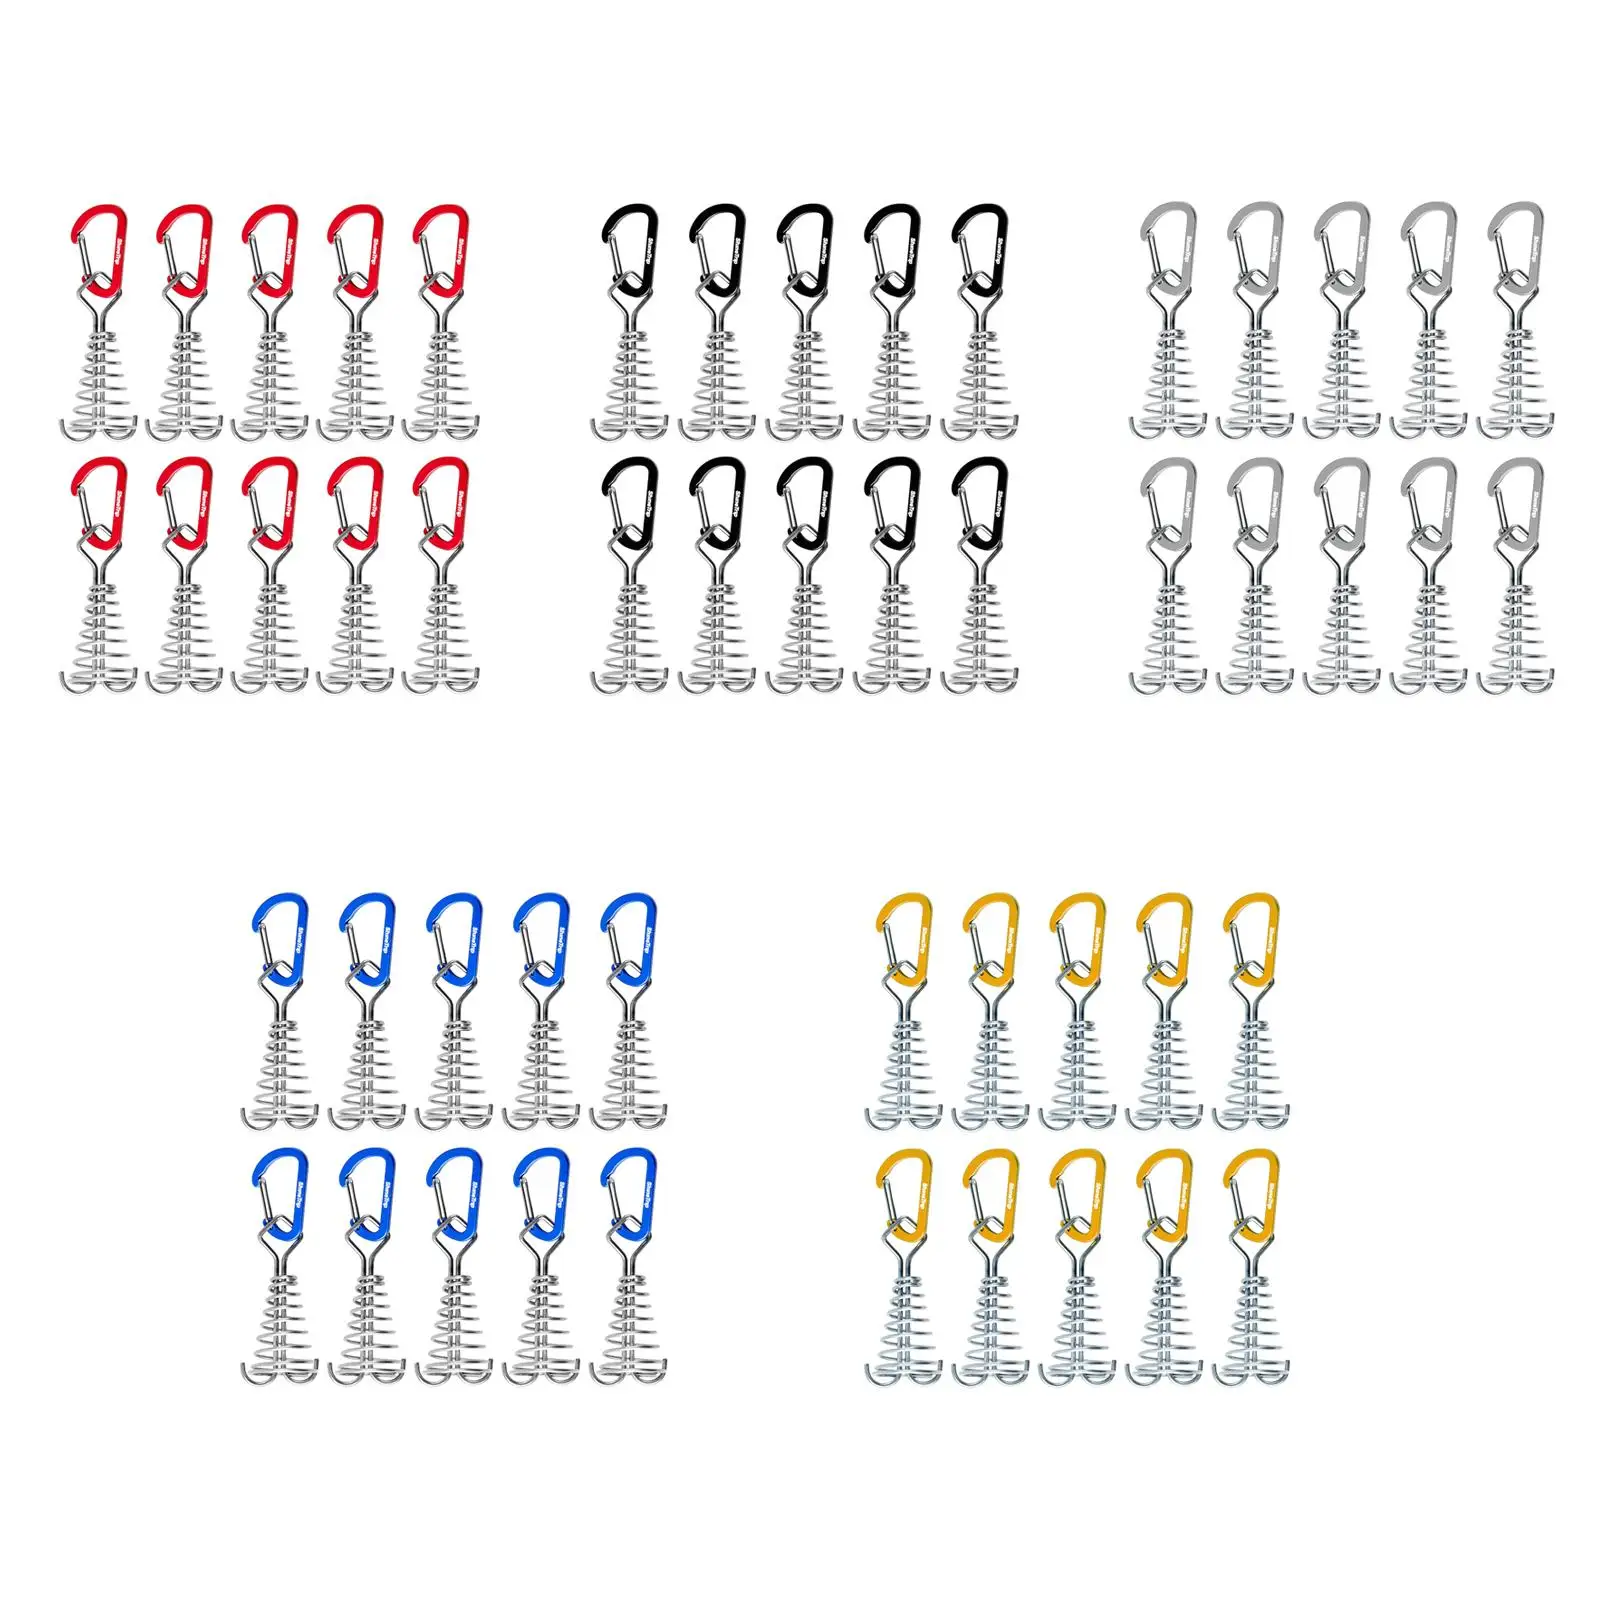 10Pcs Deck Anchor Pegs Wind Rope Anchor Windproof Tent Anchors with Carabiners for Outdoor Hiking Wood Platform Accessories